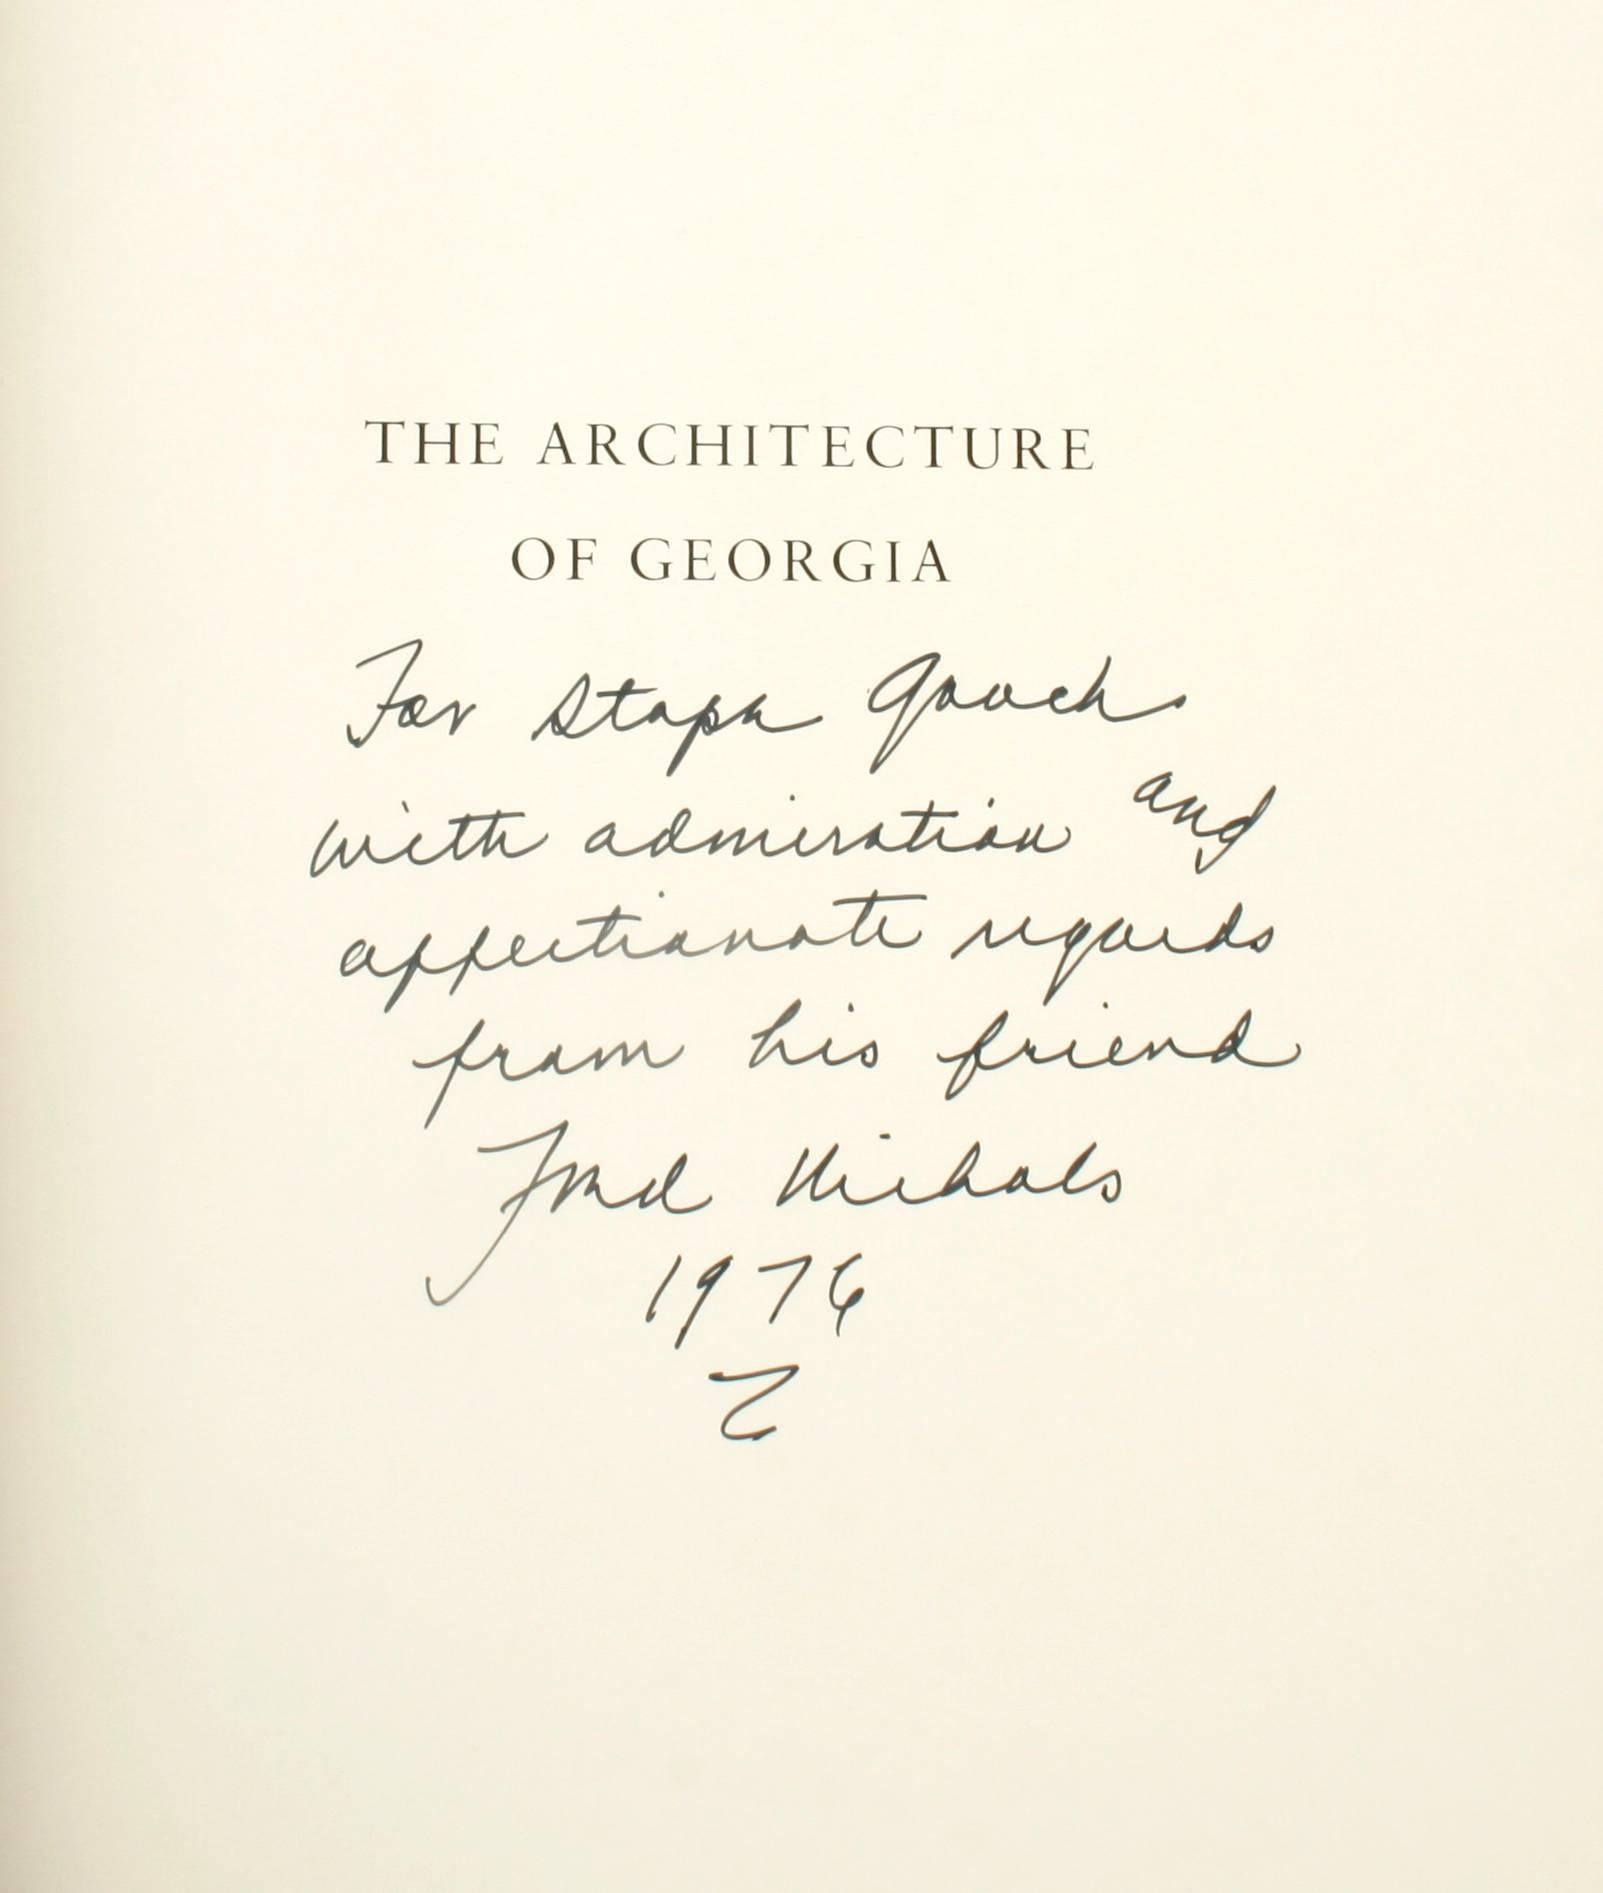 The Architecture of Georgia by and Signed by Frederick Nichols. Signed 1st Edition. The Beehive Press, Savannah, 1976, hardcover. 